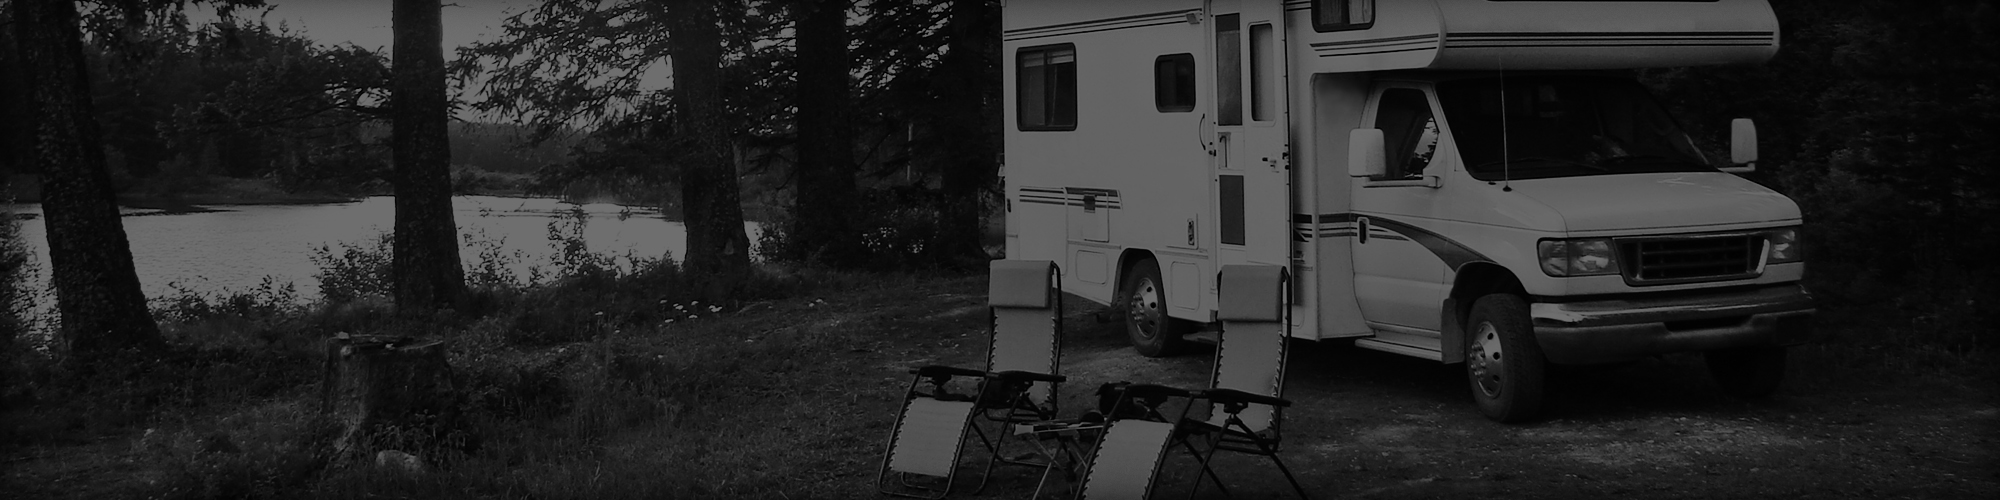 RV Parked at a Campground